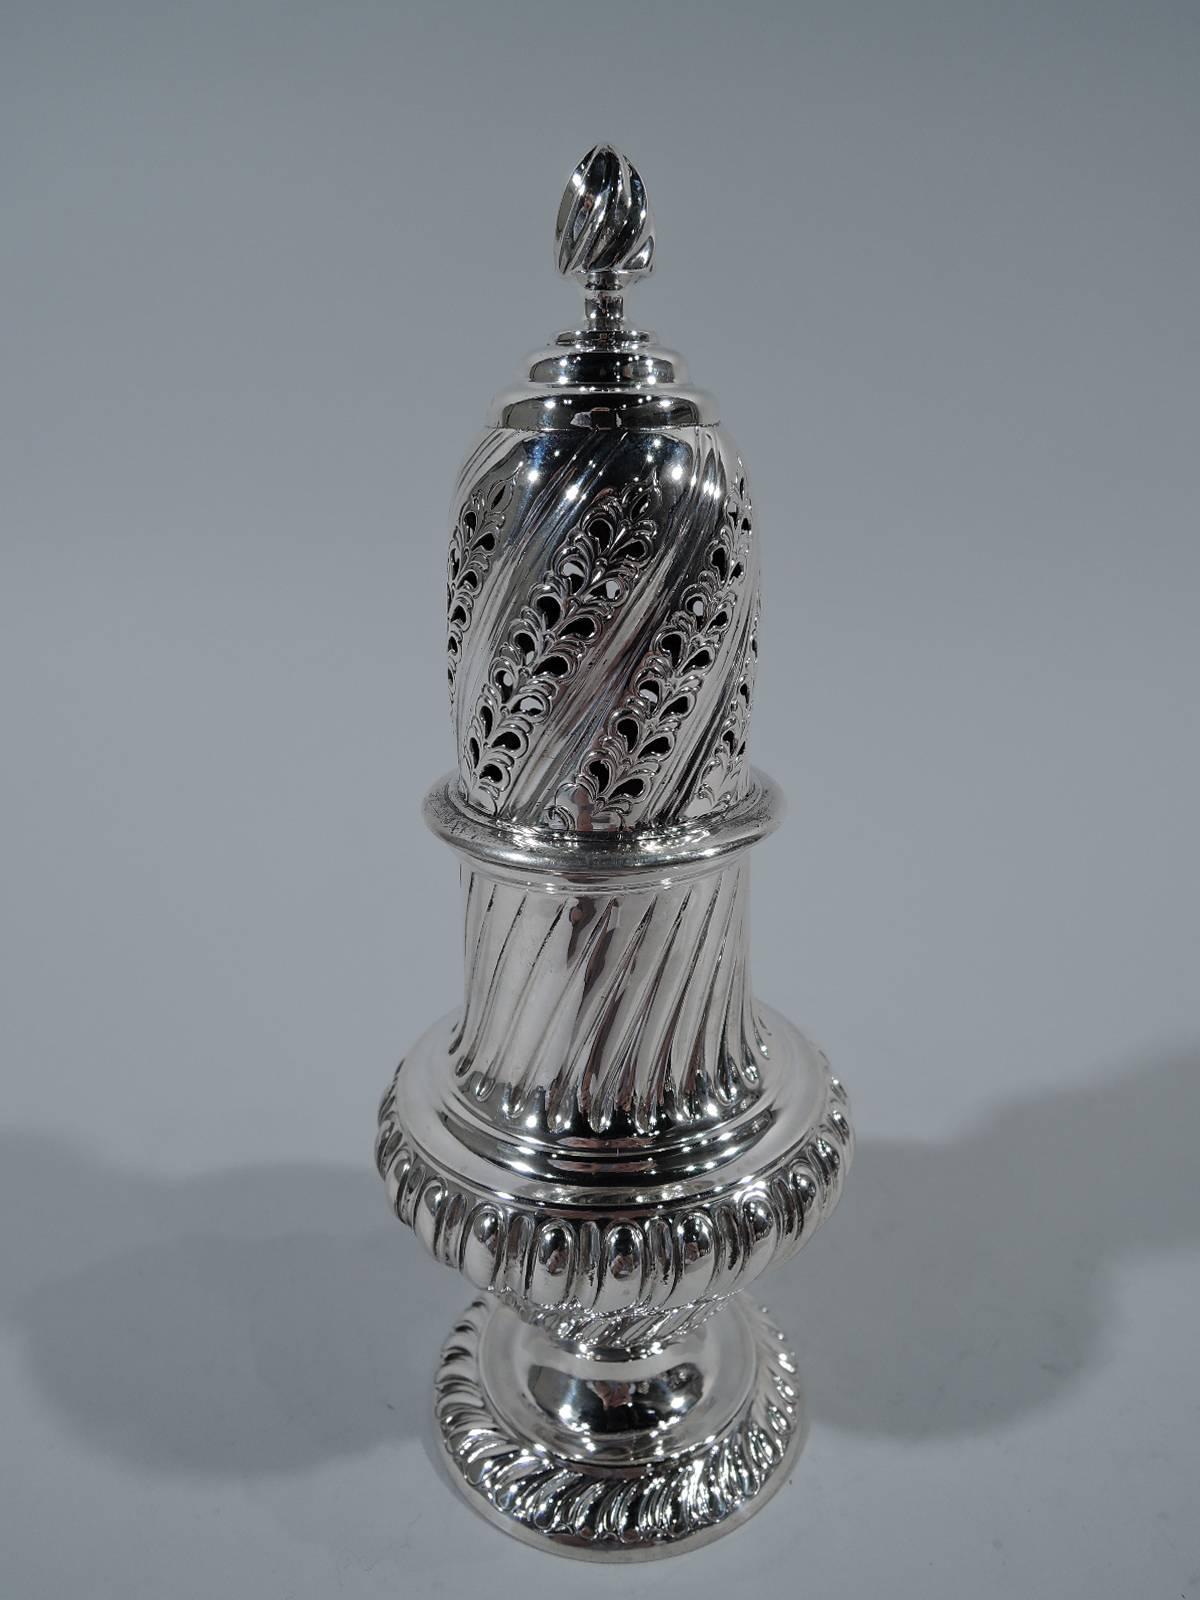 Victorian sterling silver sugar caster. Made by Fenton Bros. in Sheffield in 1889. Baluster body on raised foot. Twisted gadrooning. Cover has twisted gadrooning alternating with pierced leaves. Strapwork cartouche has engraved armorial. A fine